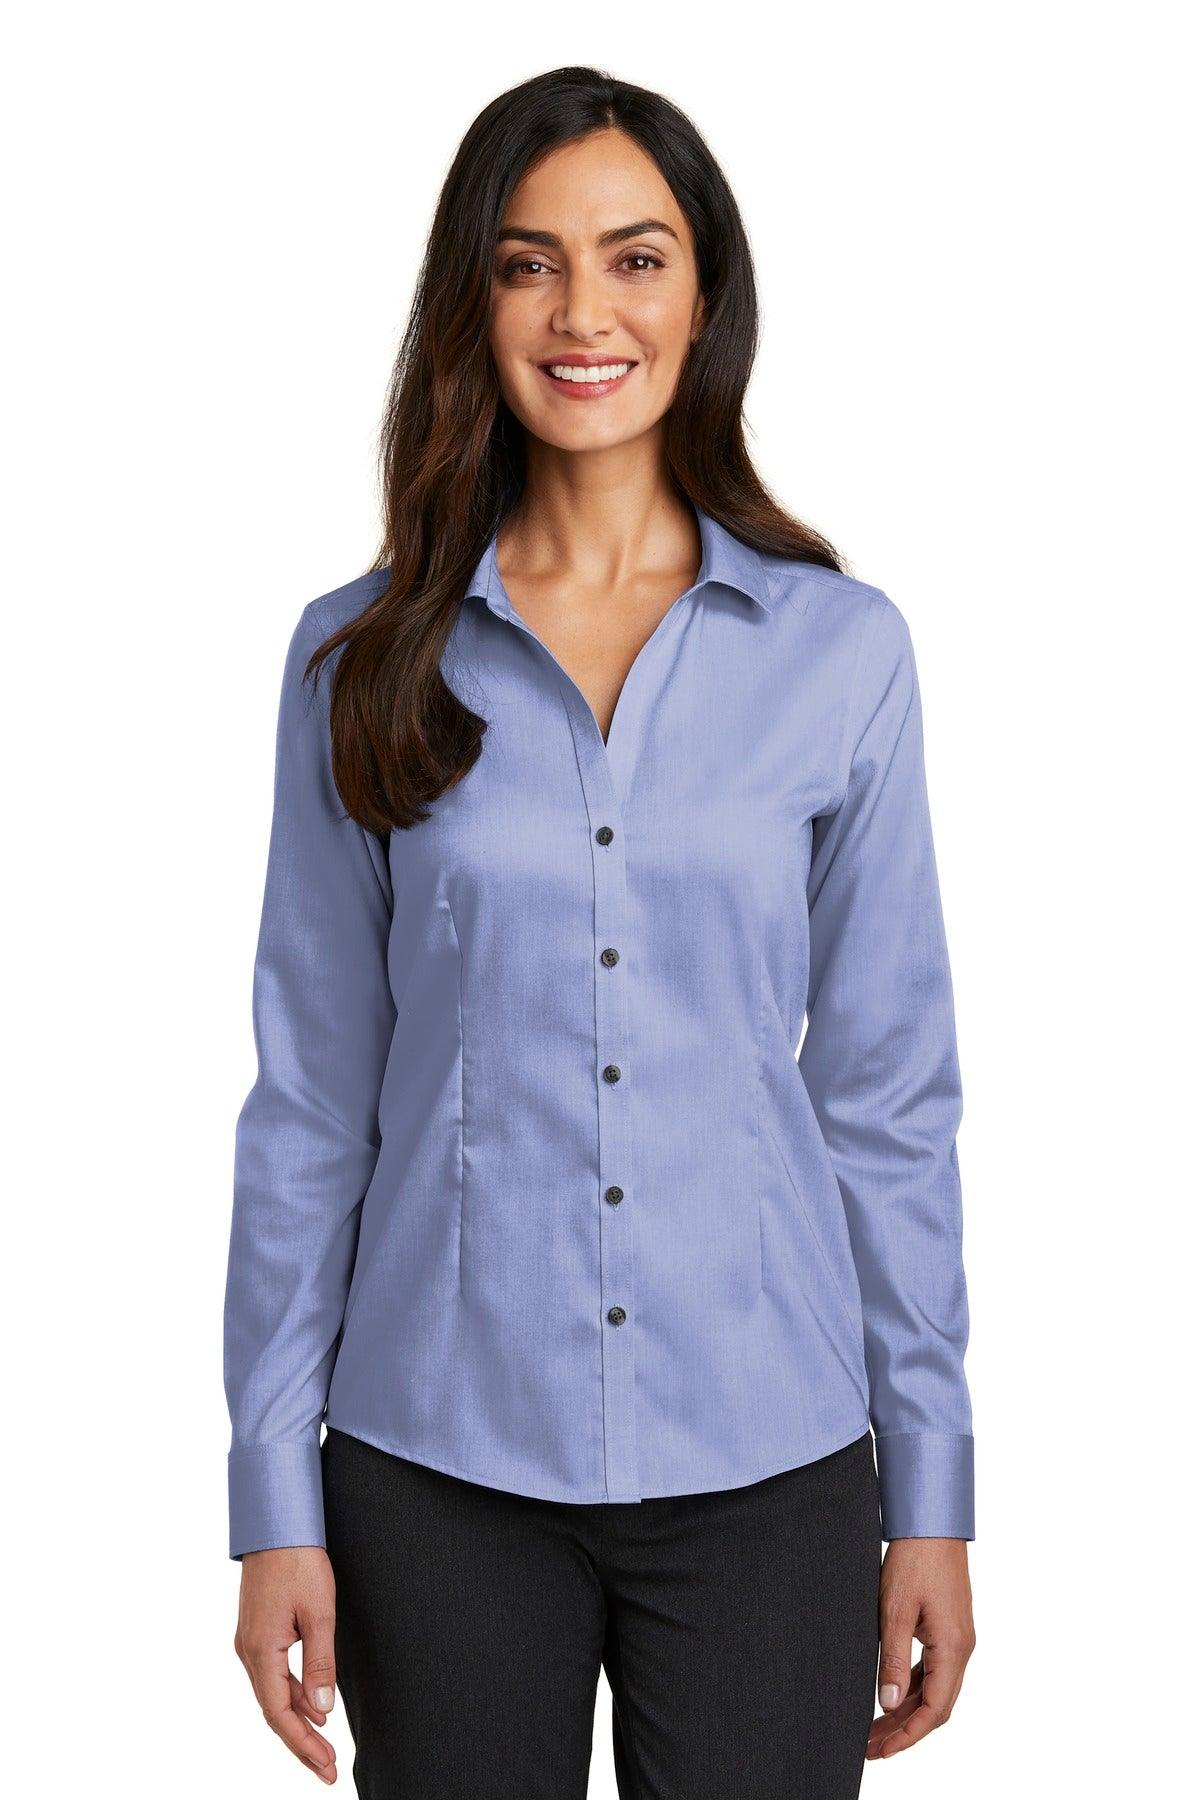 Red House Ladies Pinpoint Oxford Non-Iron Shirt. RH250 - Dresses Max